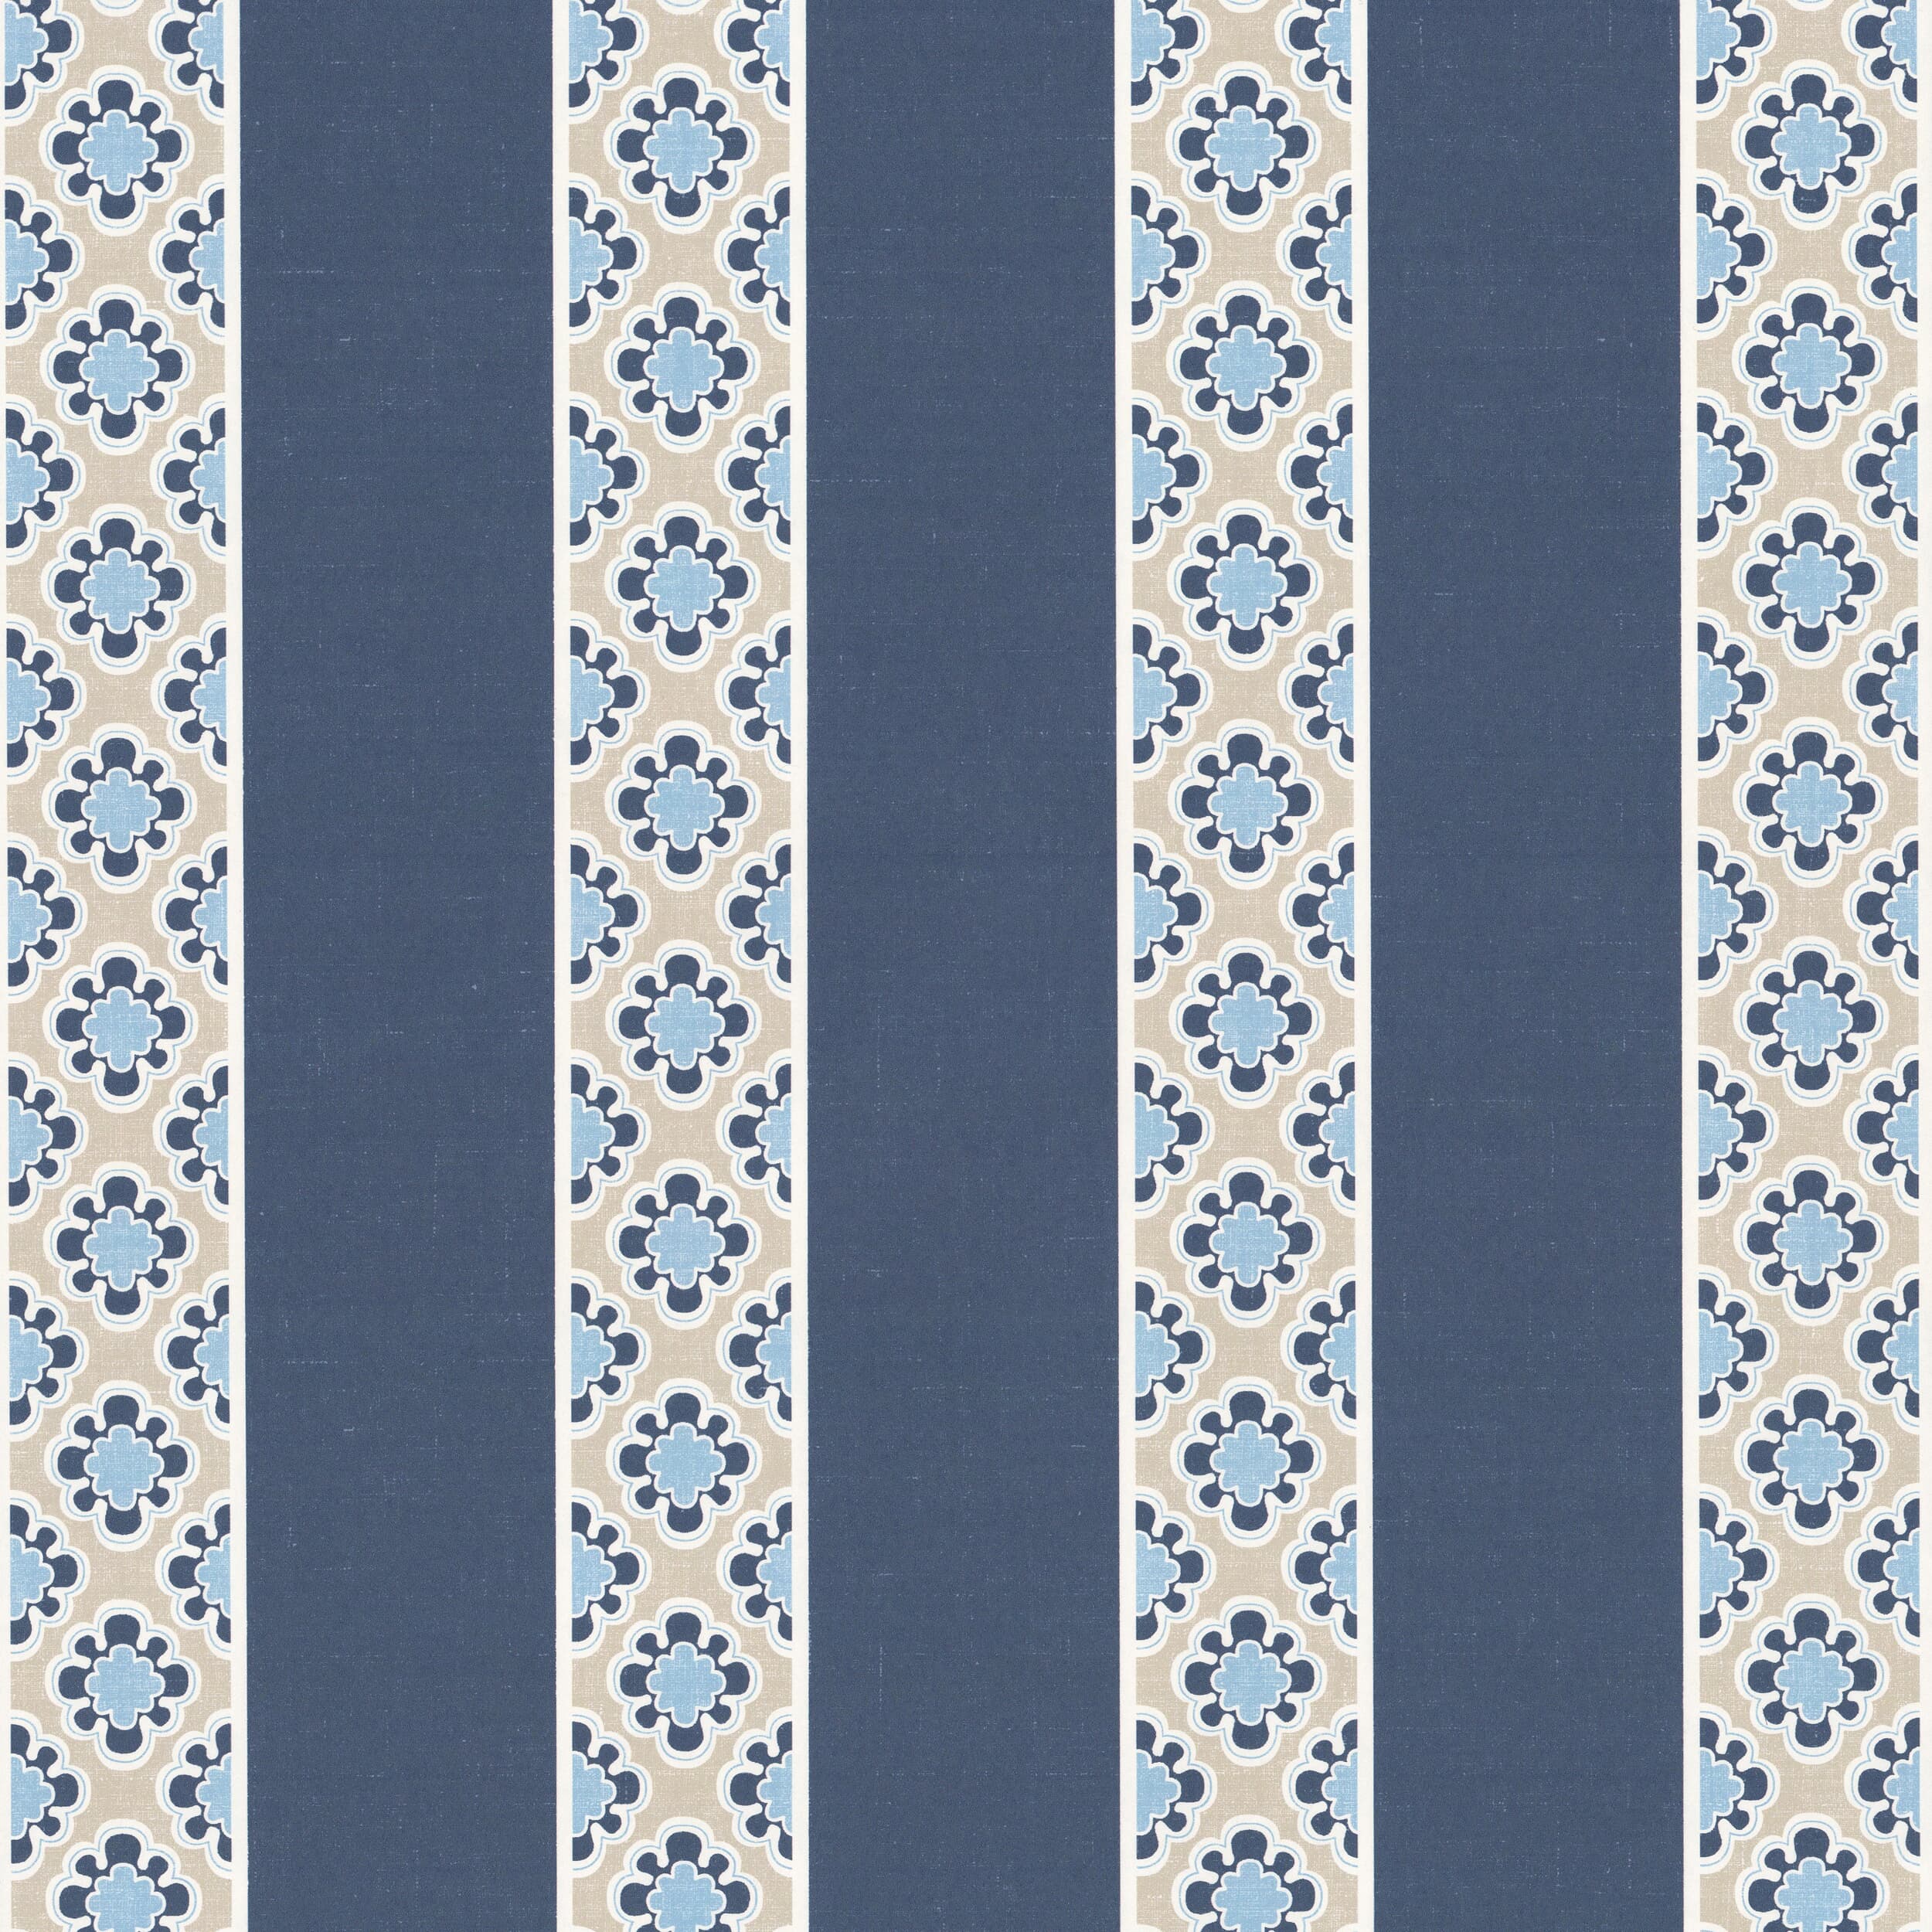 W06vl Entice 4 Navy by Stout Fabric